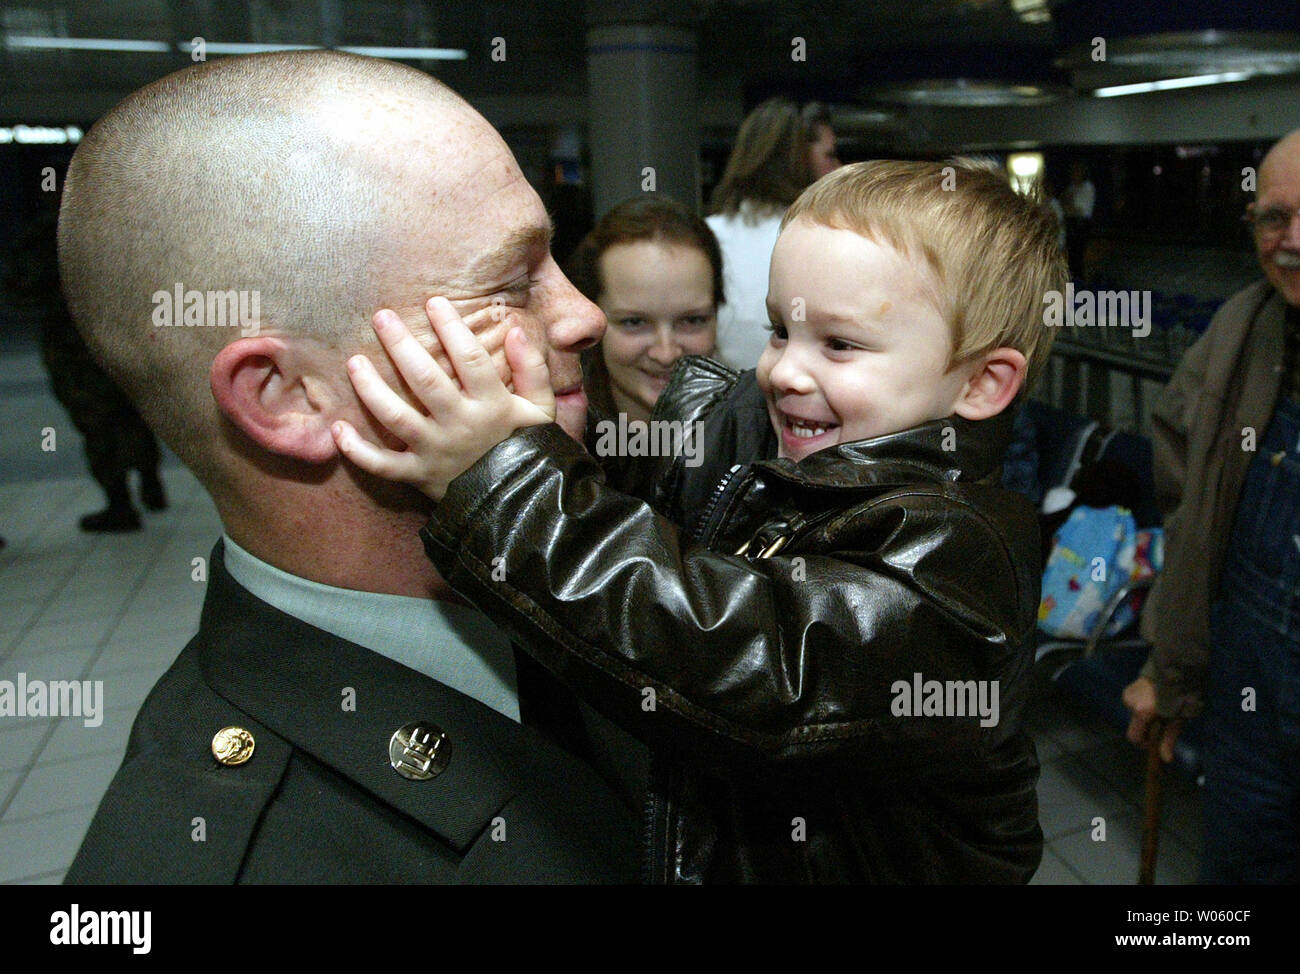 Two year-old James touches dad Damion Helms hairless face as the two are reunited  at Lambert-St. Louis International Airport during Exodus in St. Louis on December 18, 2004. Helms, stationed at Ft. Seal, OK has been away at training for three weeks, only to return without his beard. Over four thousand soilders from Fort Leonard Wood and other training facilities, pass through the airport on their way home for the holidays. UPI Photo/Bill Greenblatt) Stock Photo